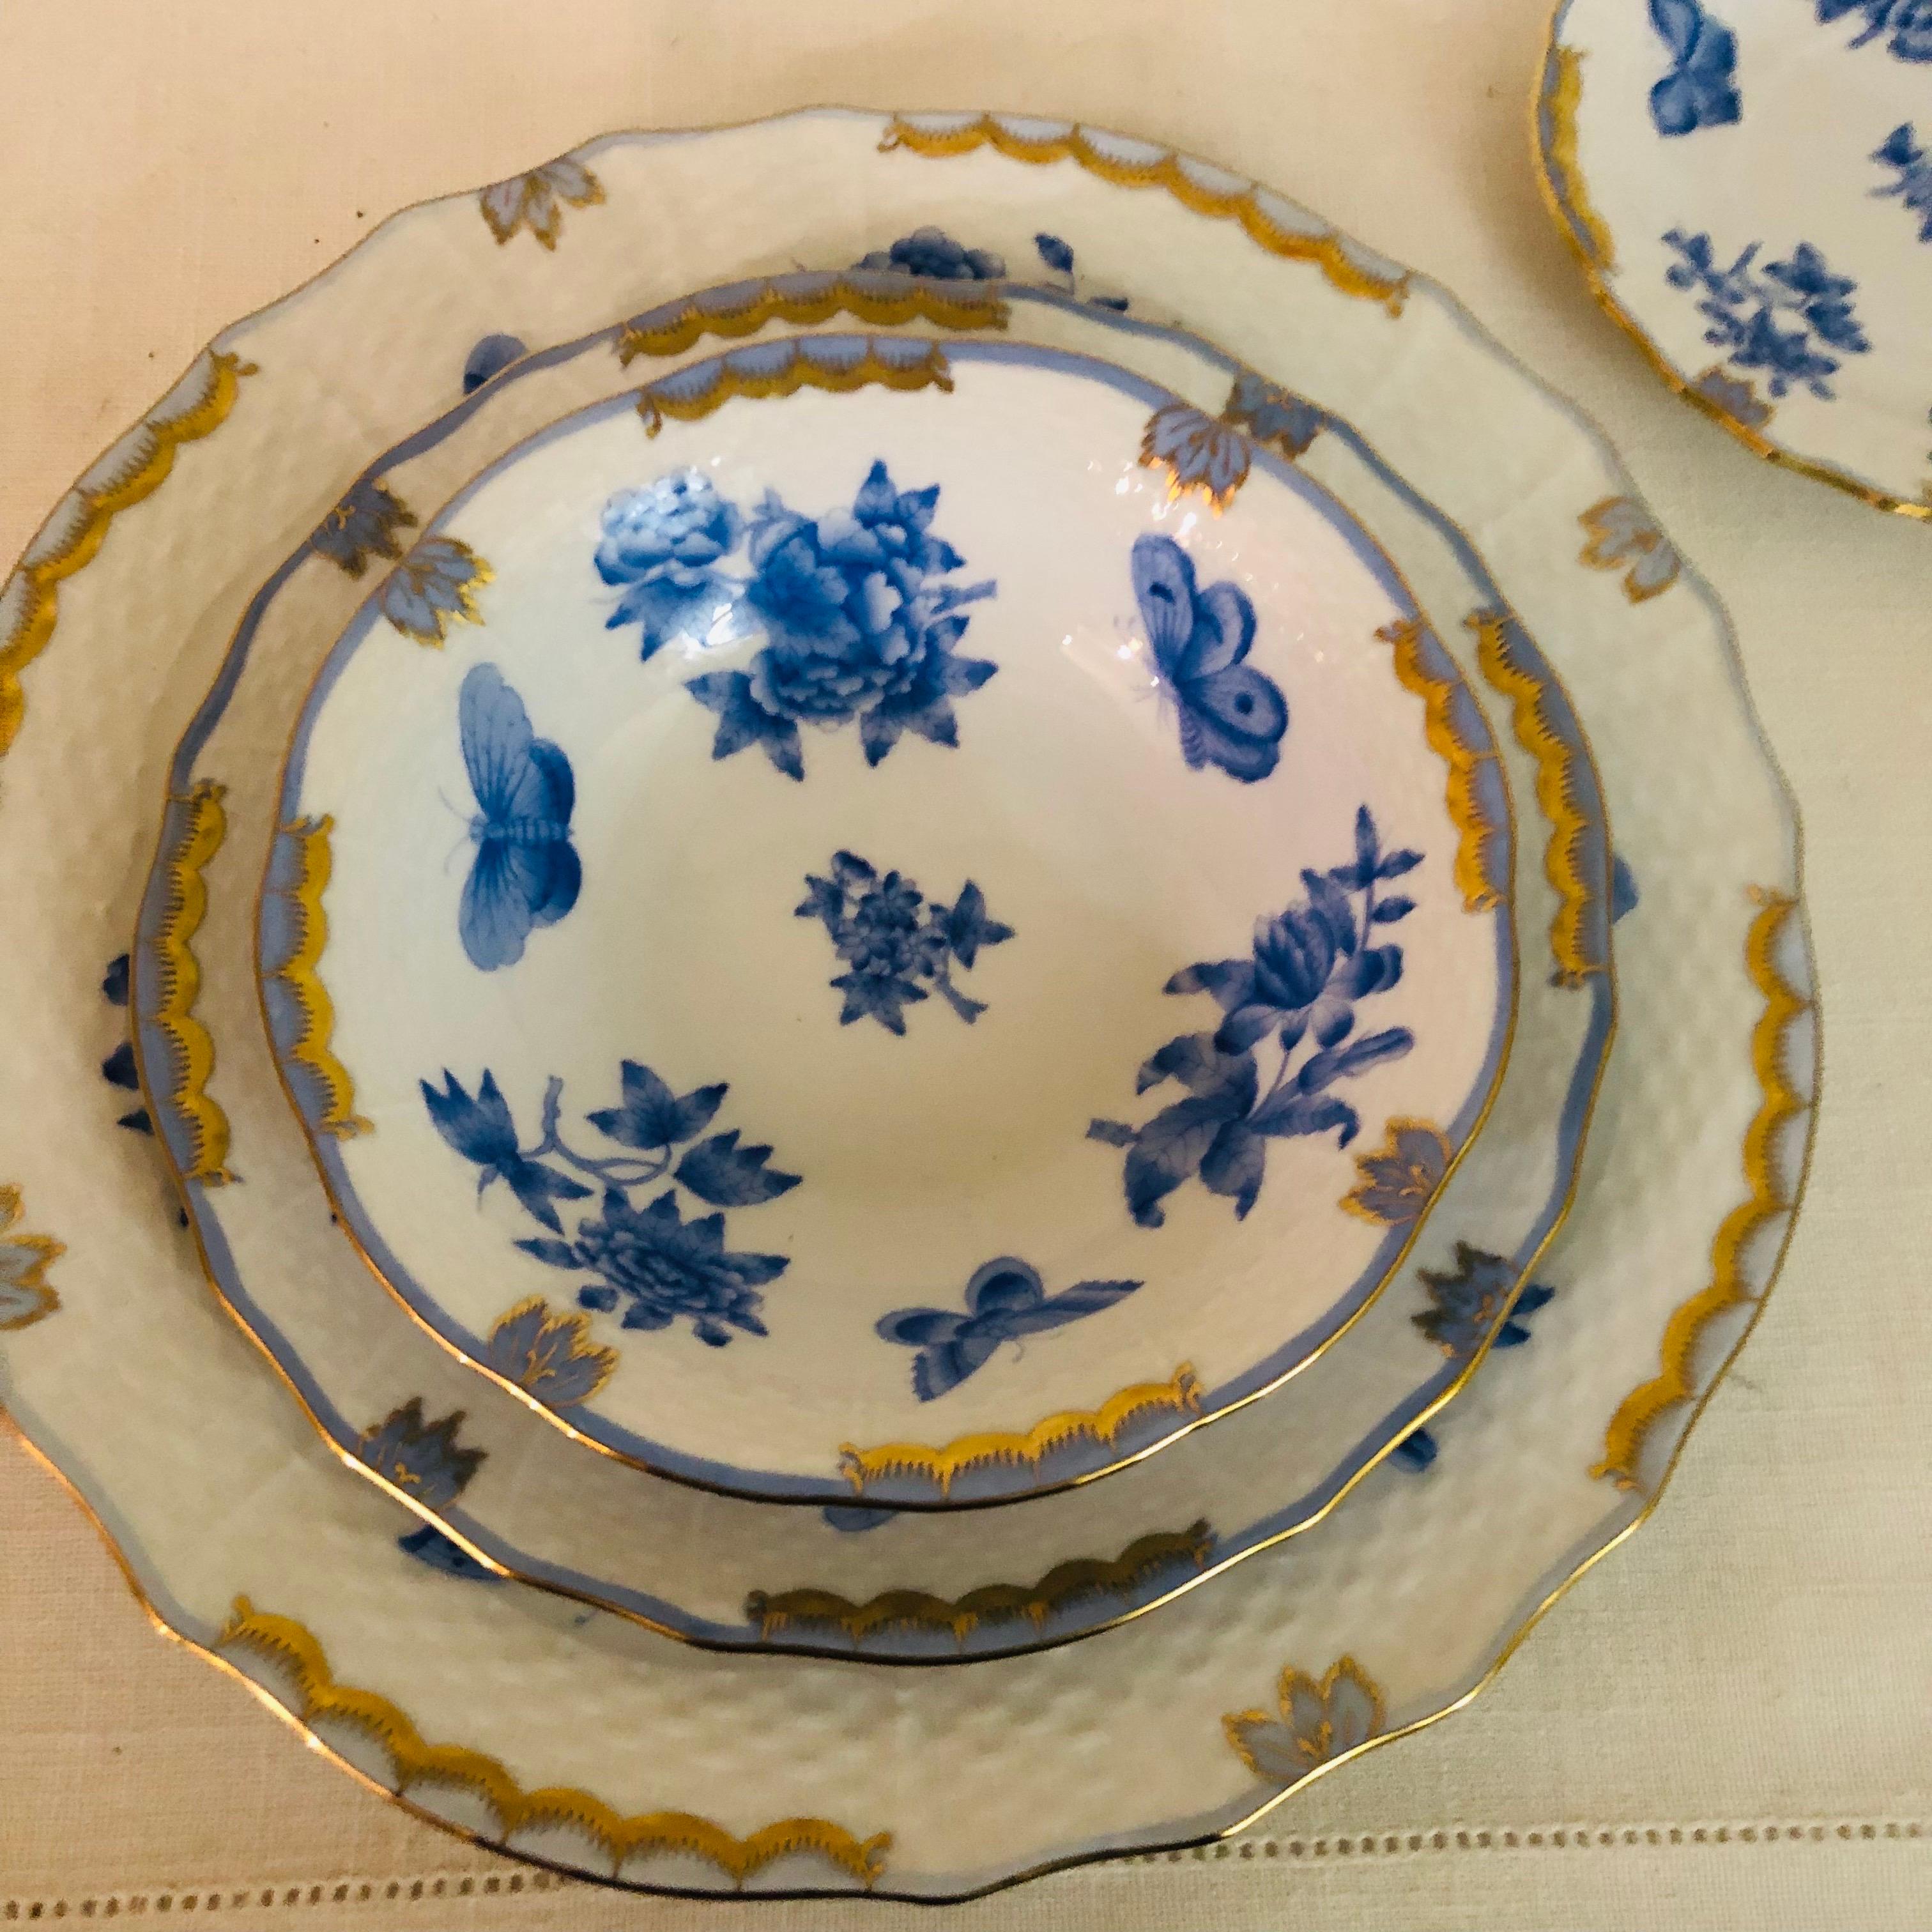 Extensive Herend Fortuna Dinner Service Painted with Butterflies and Flowers For Sale 8